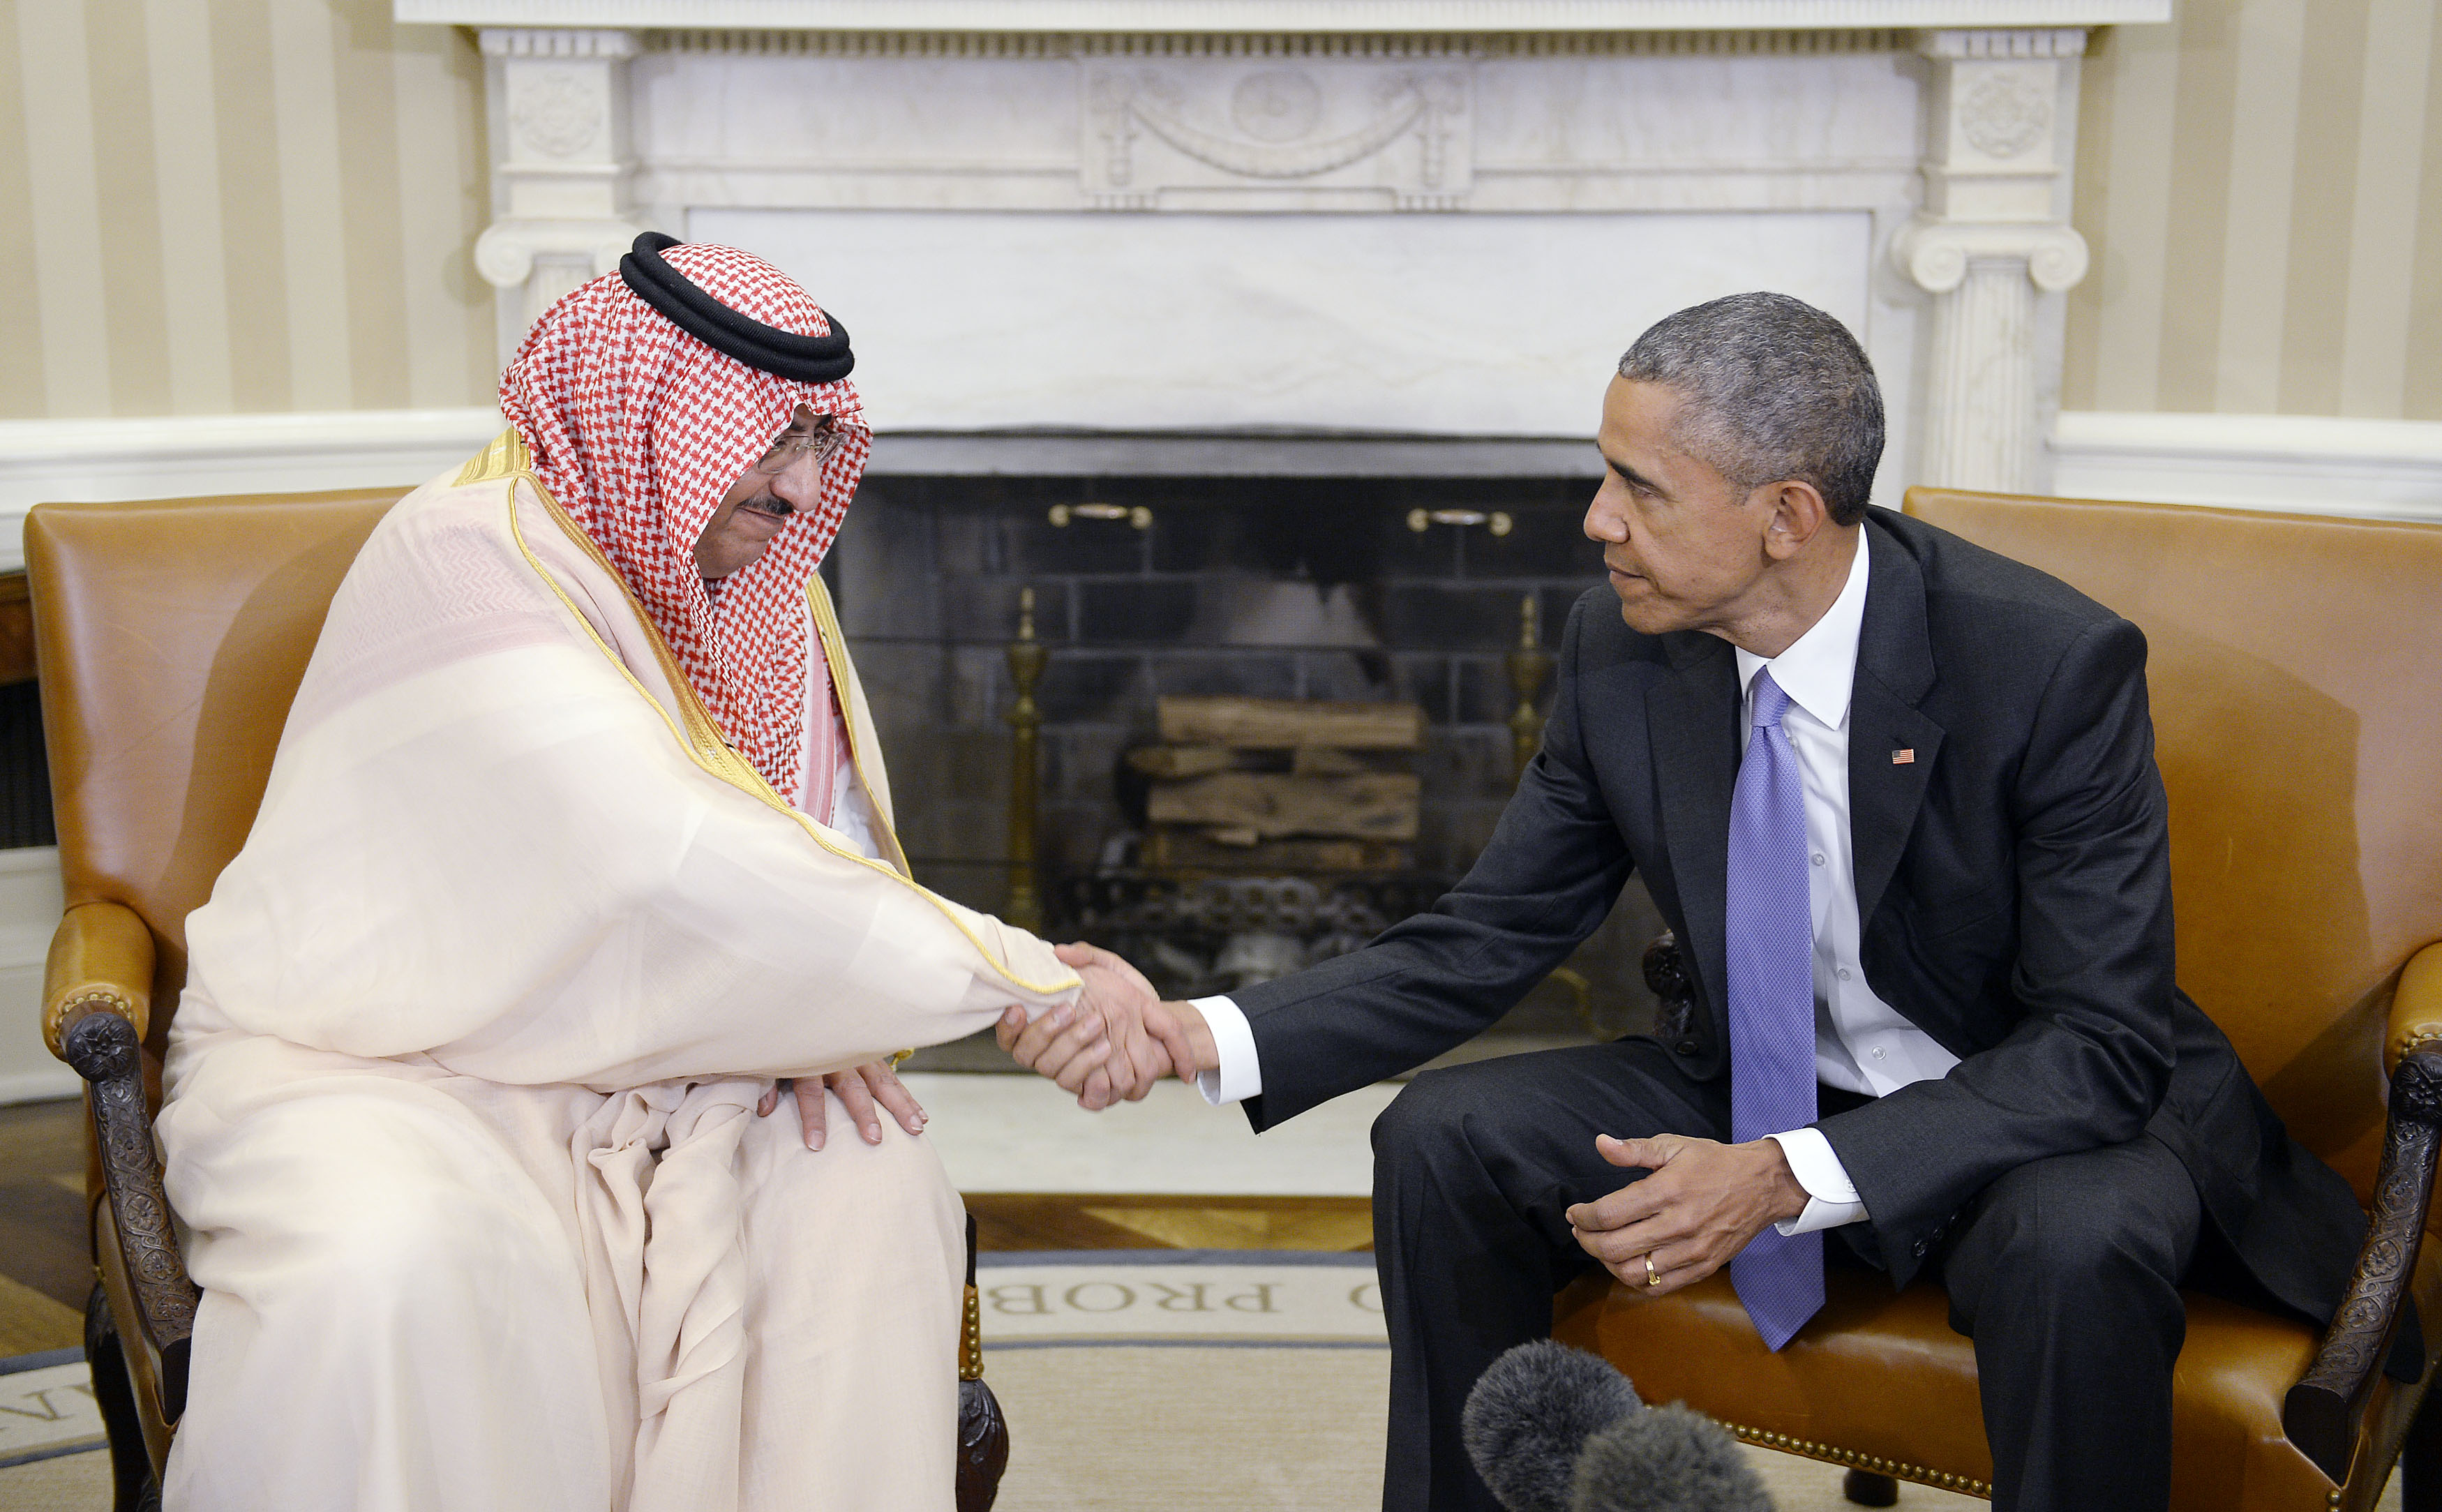 Popular with U.S. officials, MBN shakes hands with President Obama during the 2015 Arab Summit in Washington.